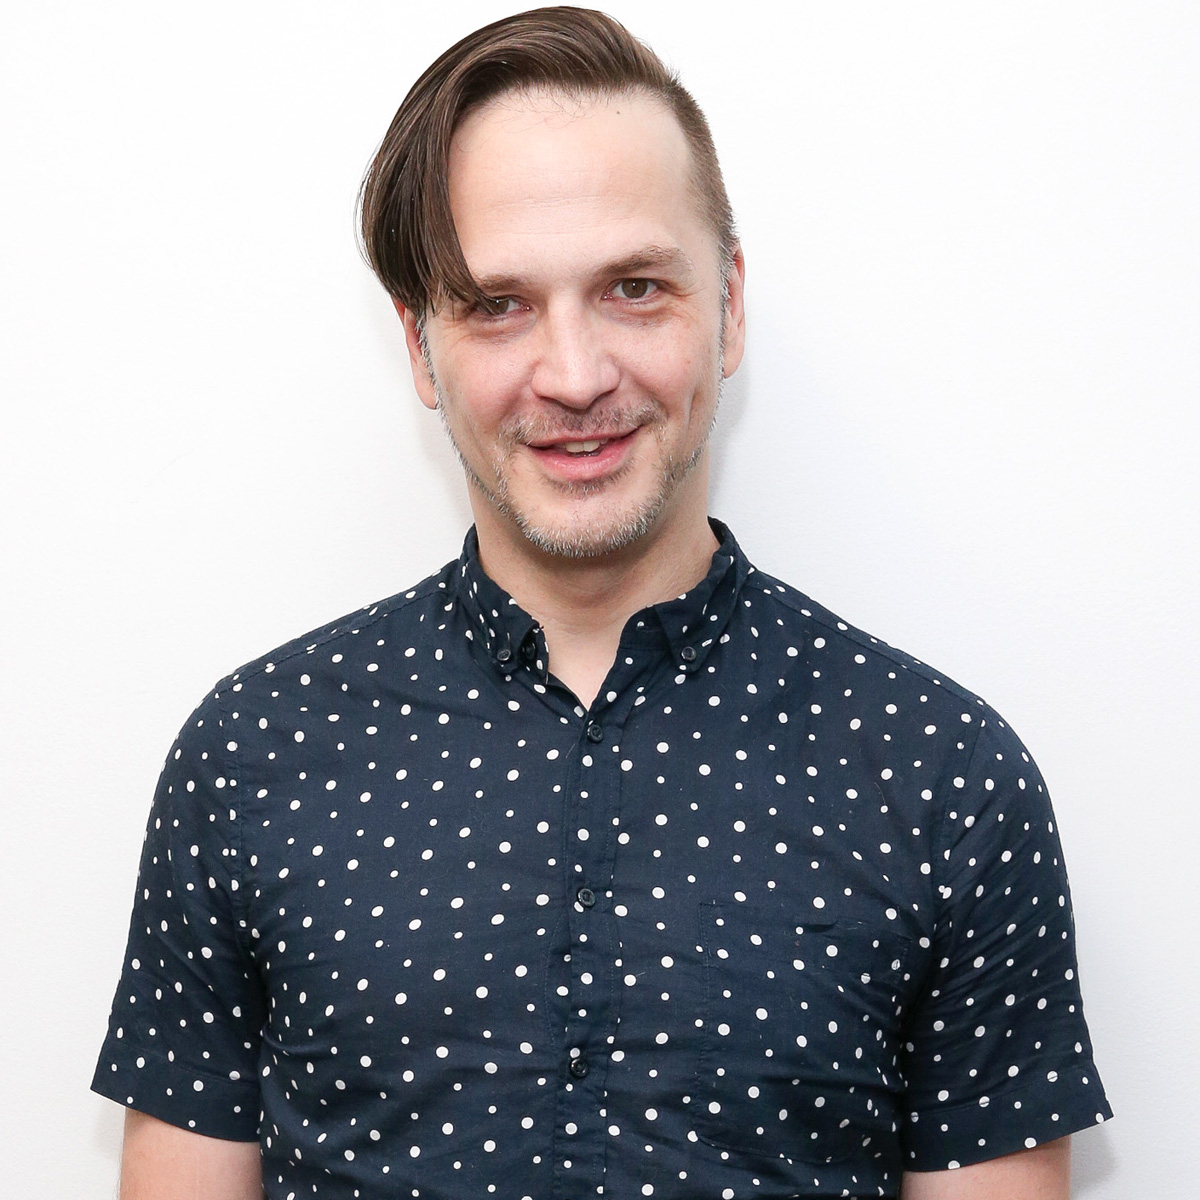 The infamous “Club Kids” killer, Michael Alig, killed at 54: Report